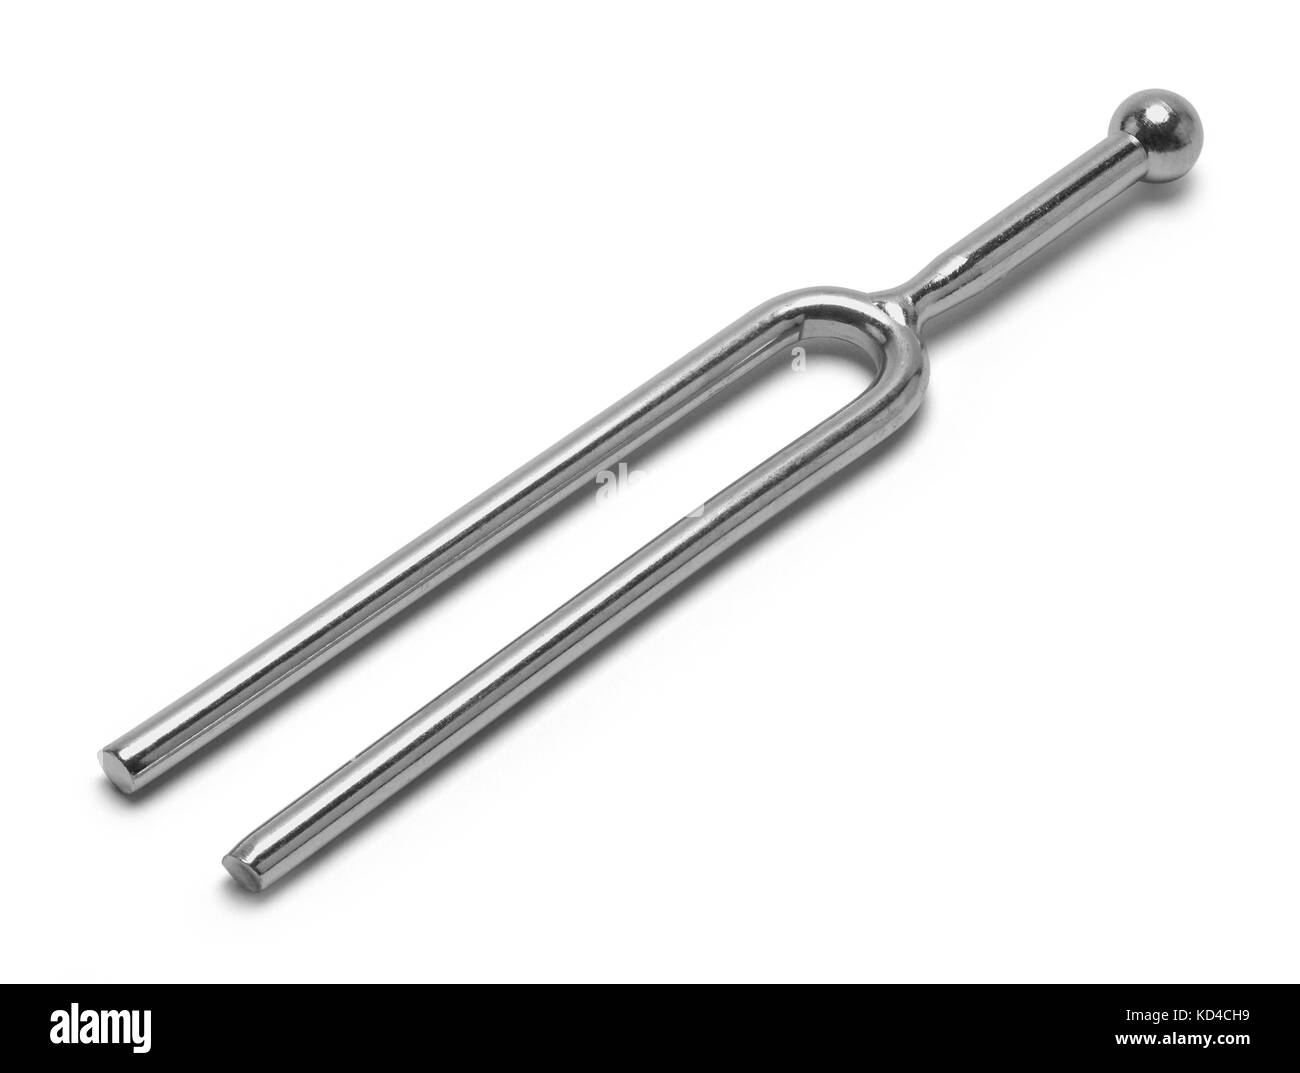 Metal Tuning Fork Isolated on a White Background. Stock Photo